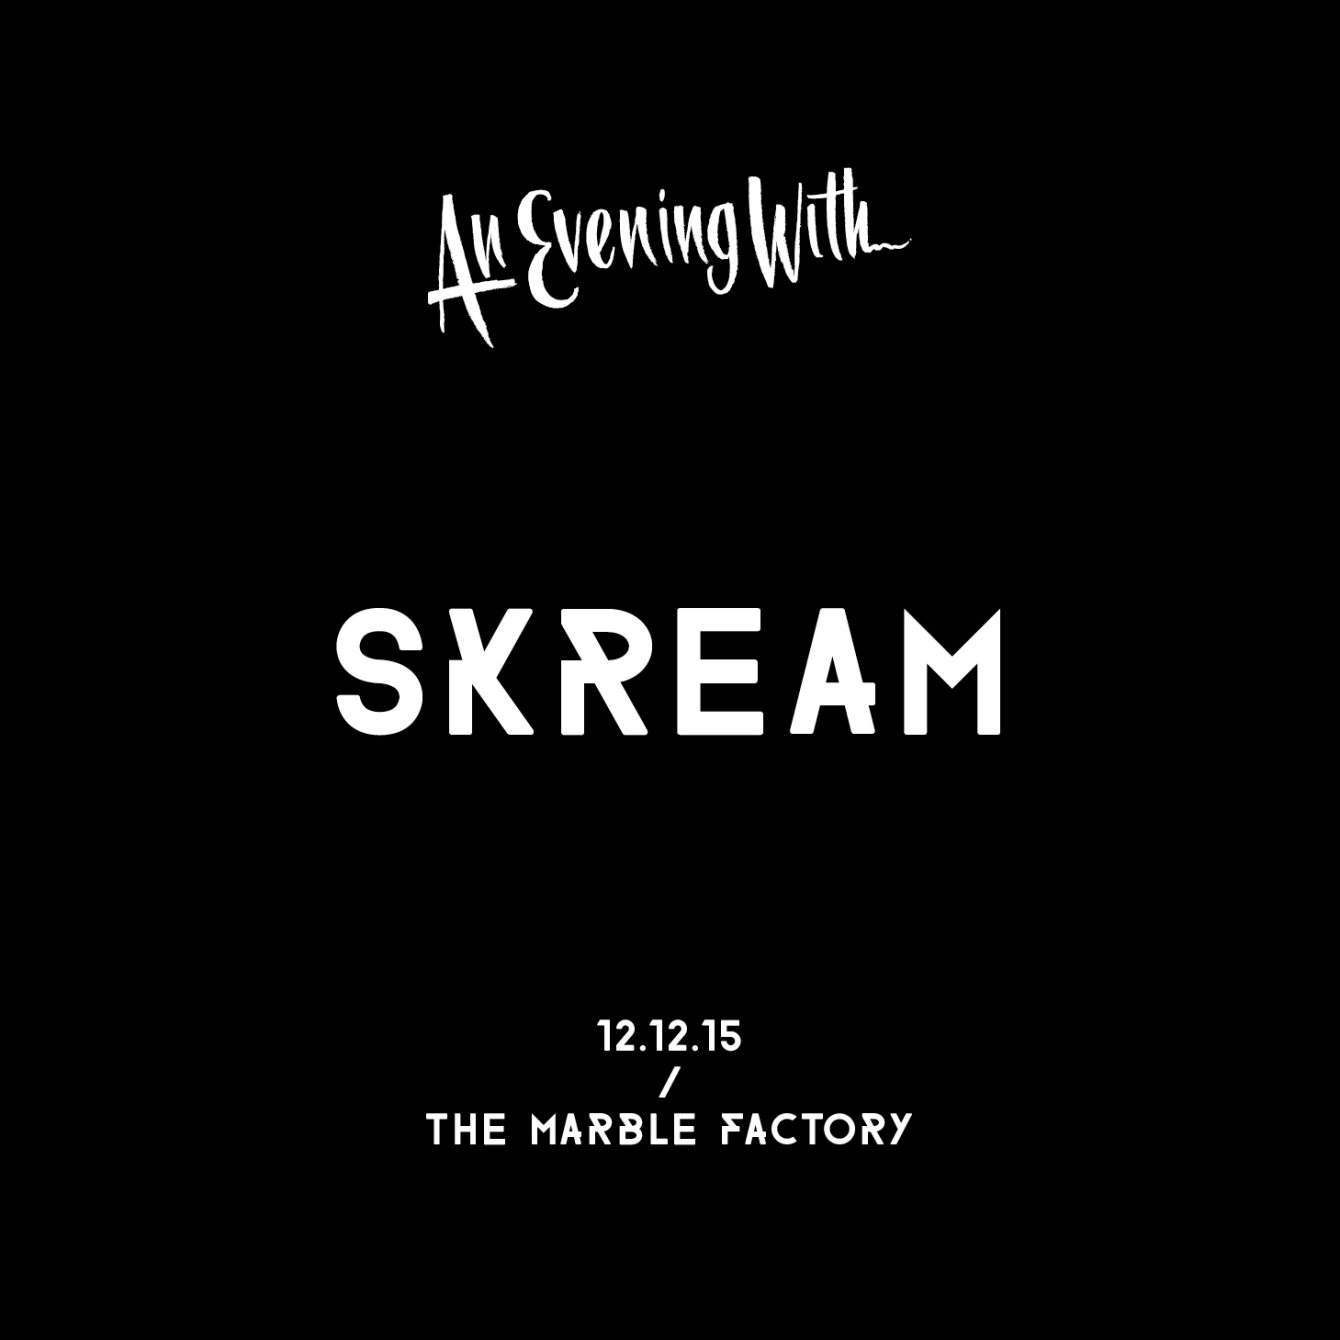 An Evening with Skream - Página frontal